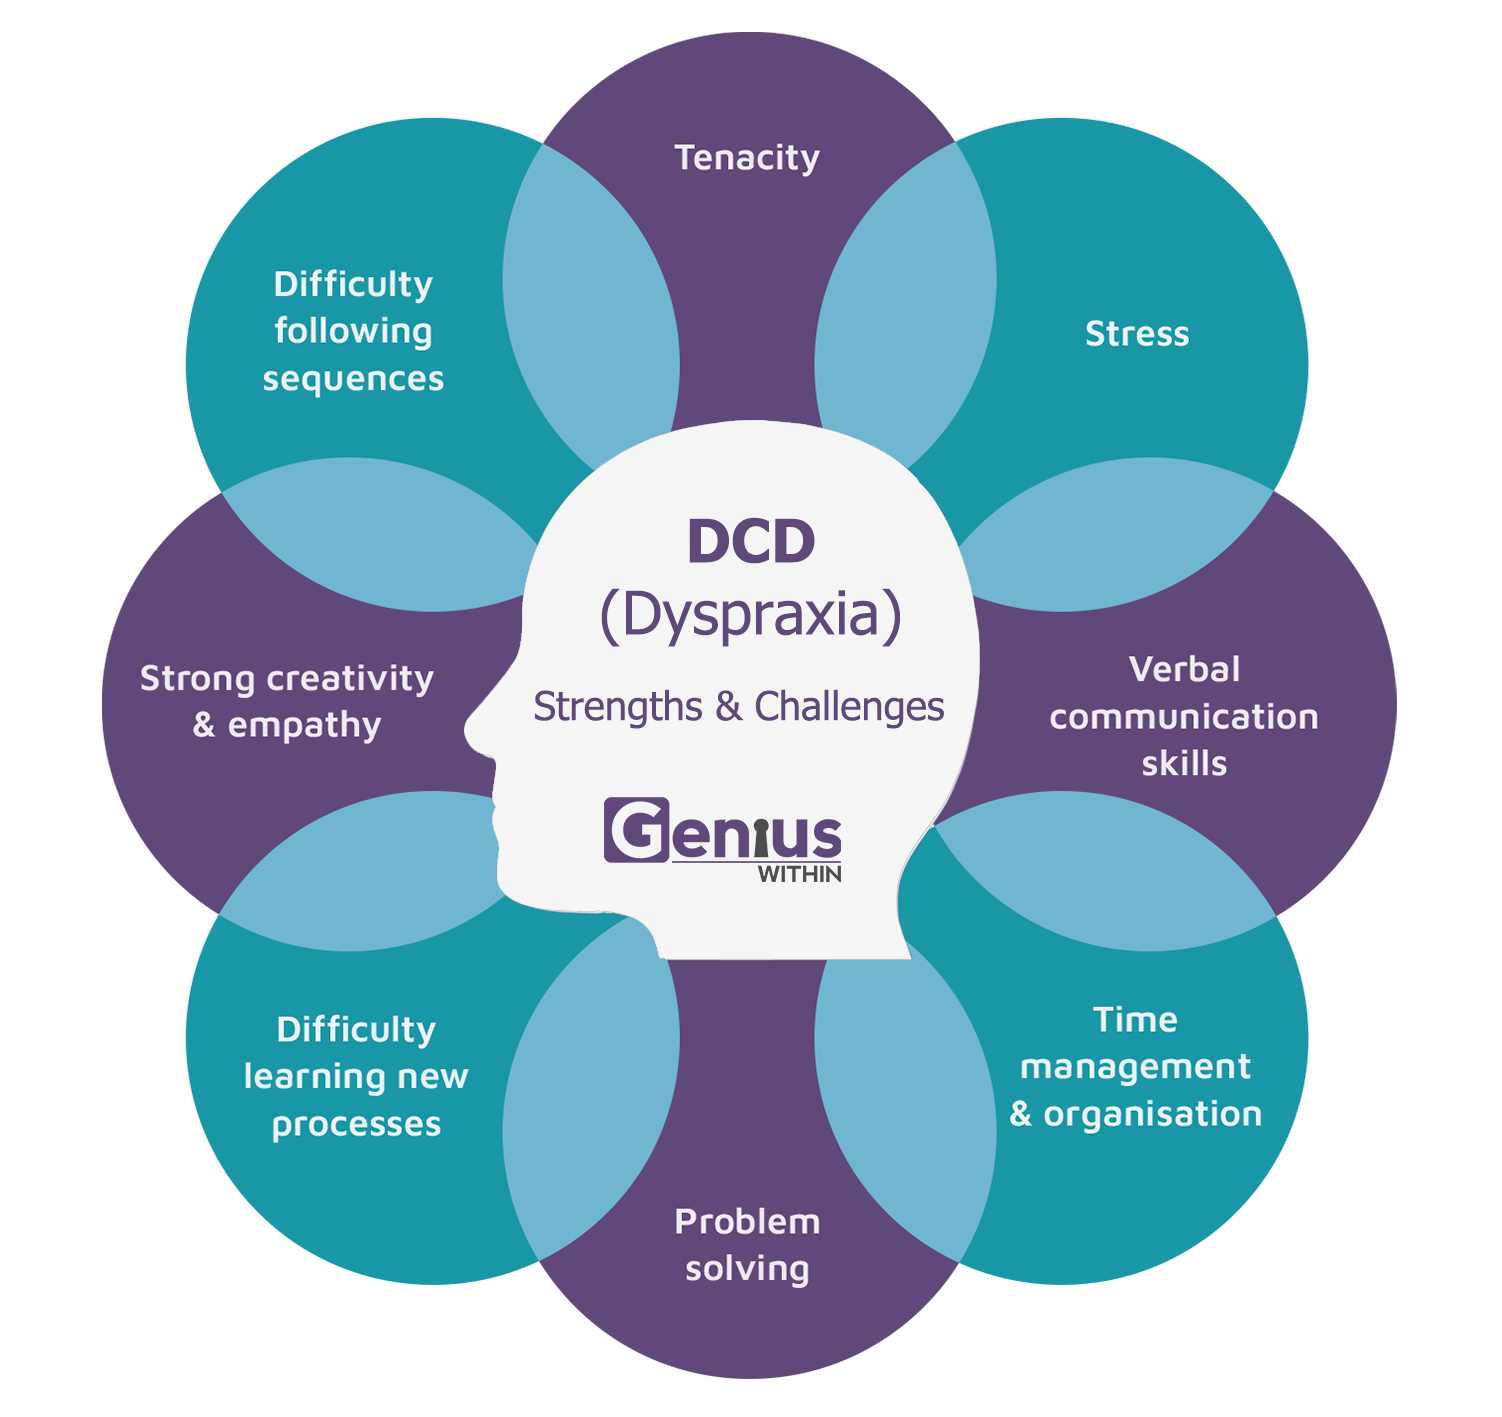 Info graphic with head at the centre and overlapping text bubbles in a circle around it. Title reads: DCD (dyspraxia) strengths and challenges. The strengths and challenges are listed as follows; Tenacity, stress, verbal communication skills, time management and organisation, problem solving, difficulty learning new processes, strong creativity and empathy, difficulty following sequences.